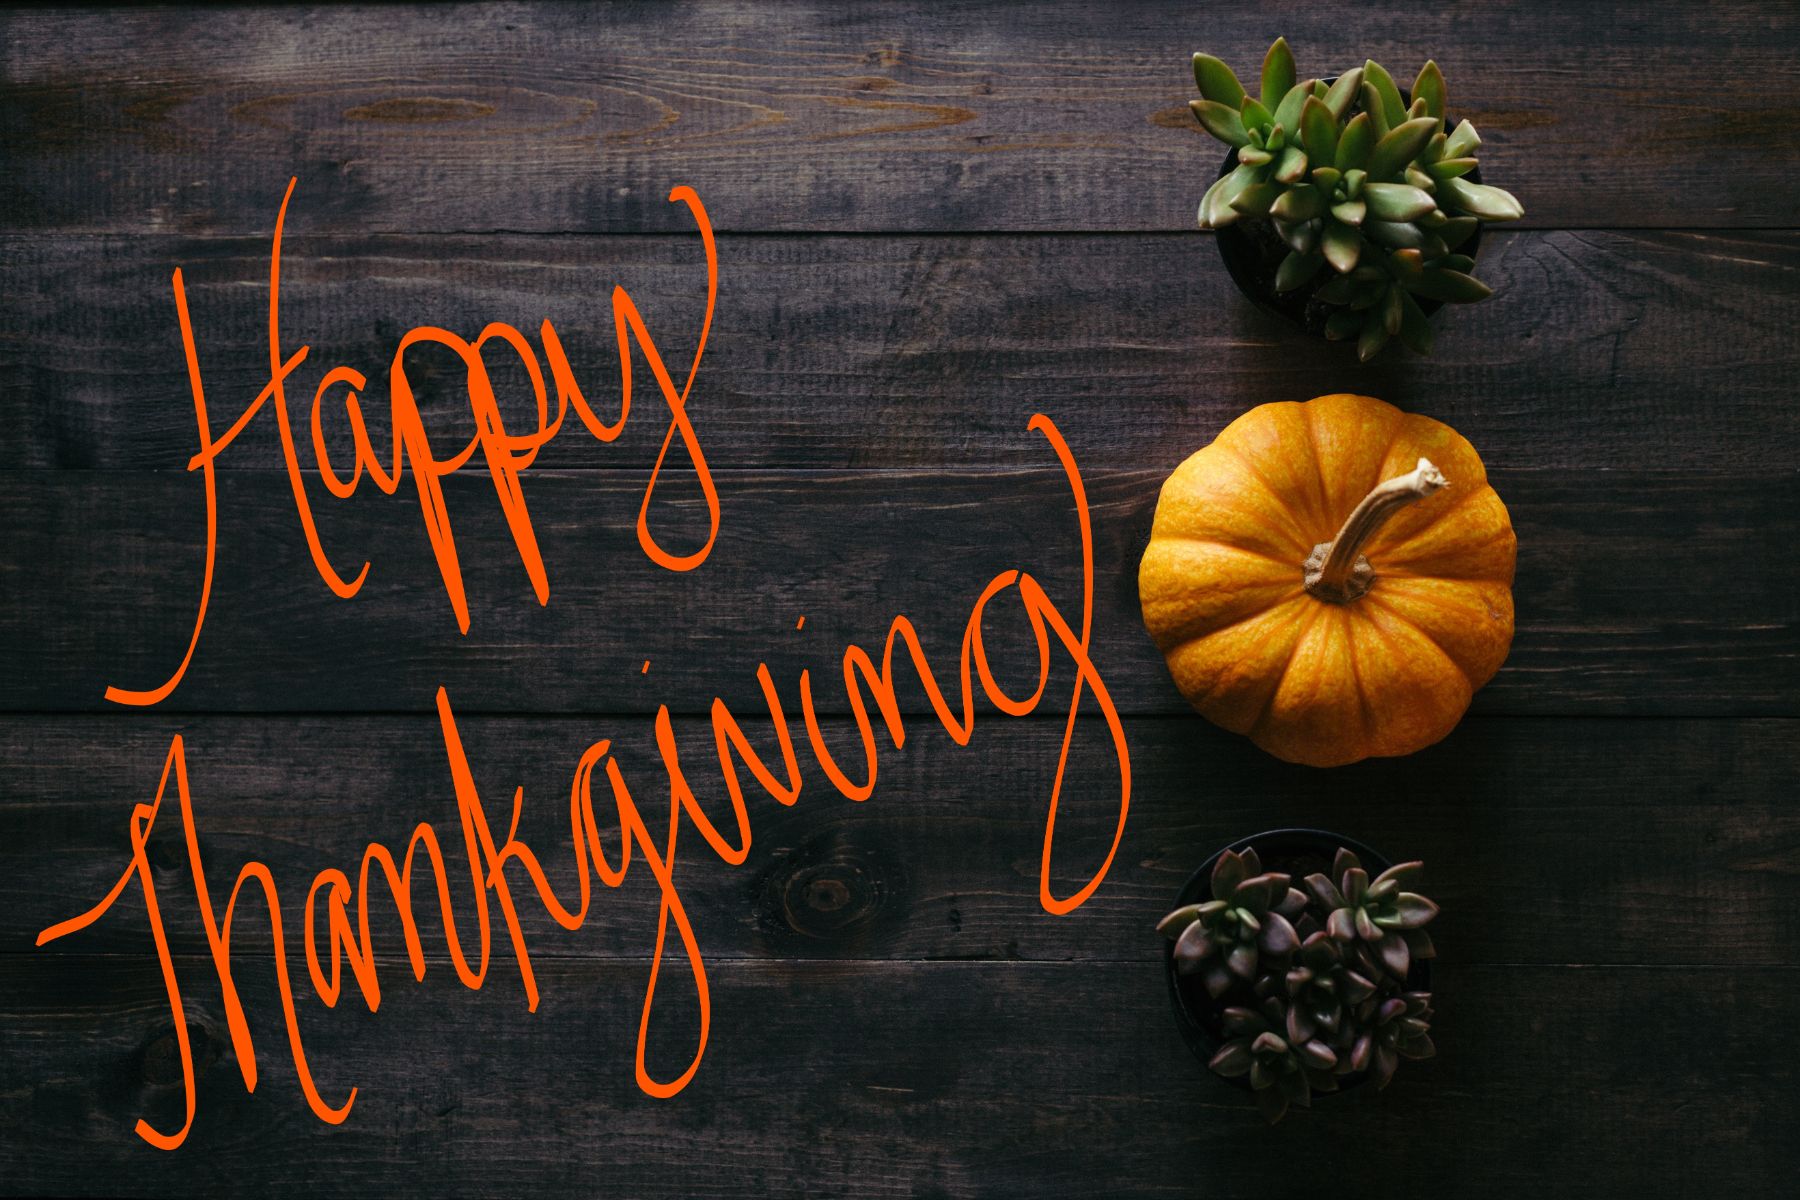 Happy Thanksgiving from Morning Star Builders